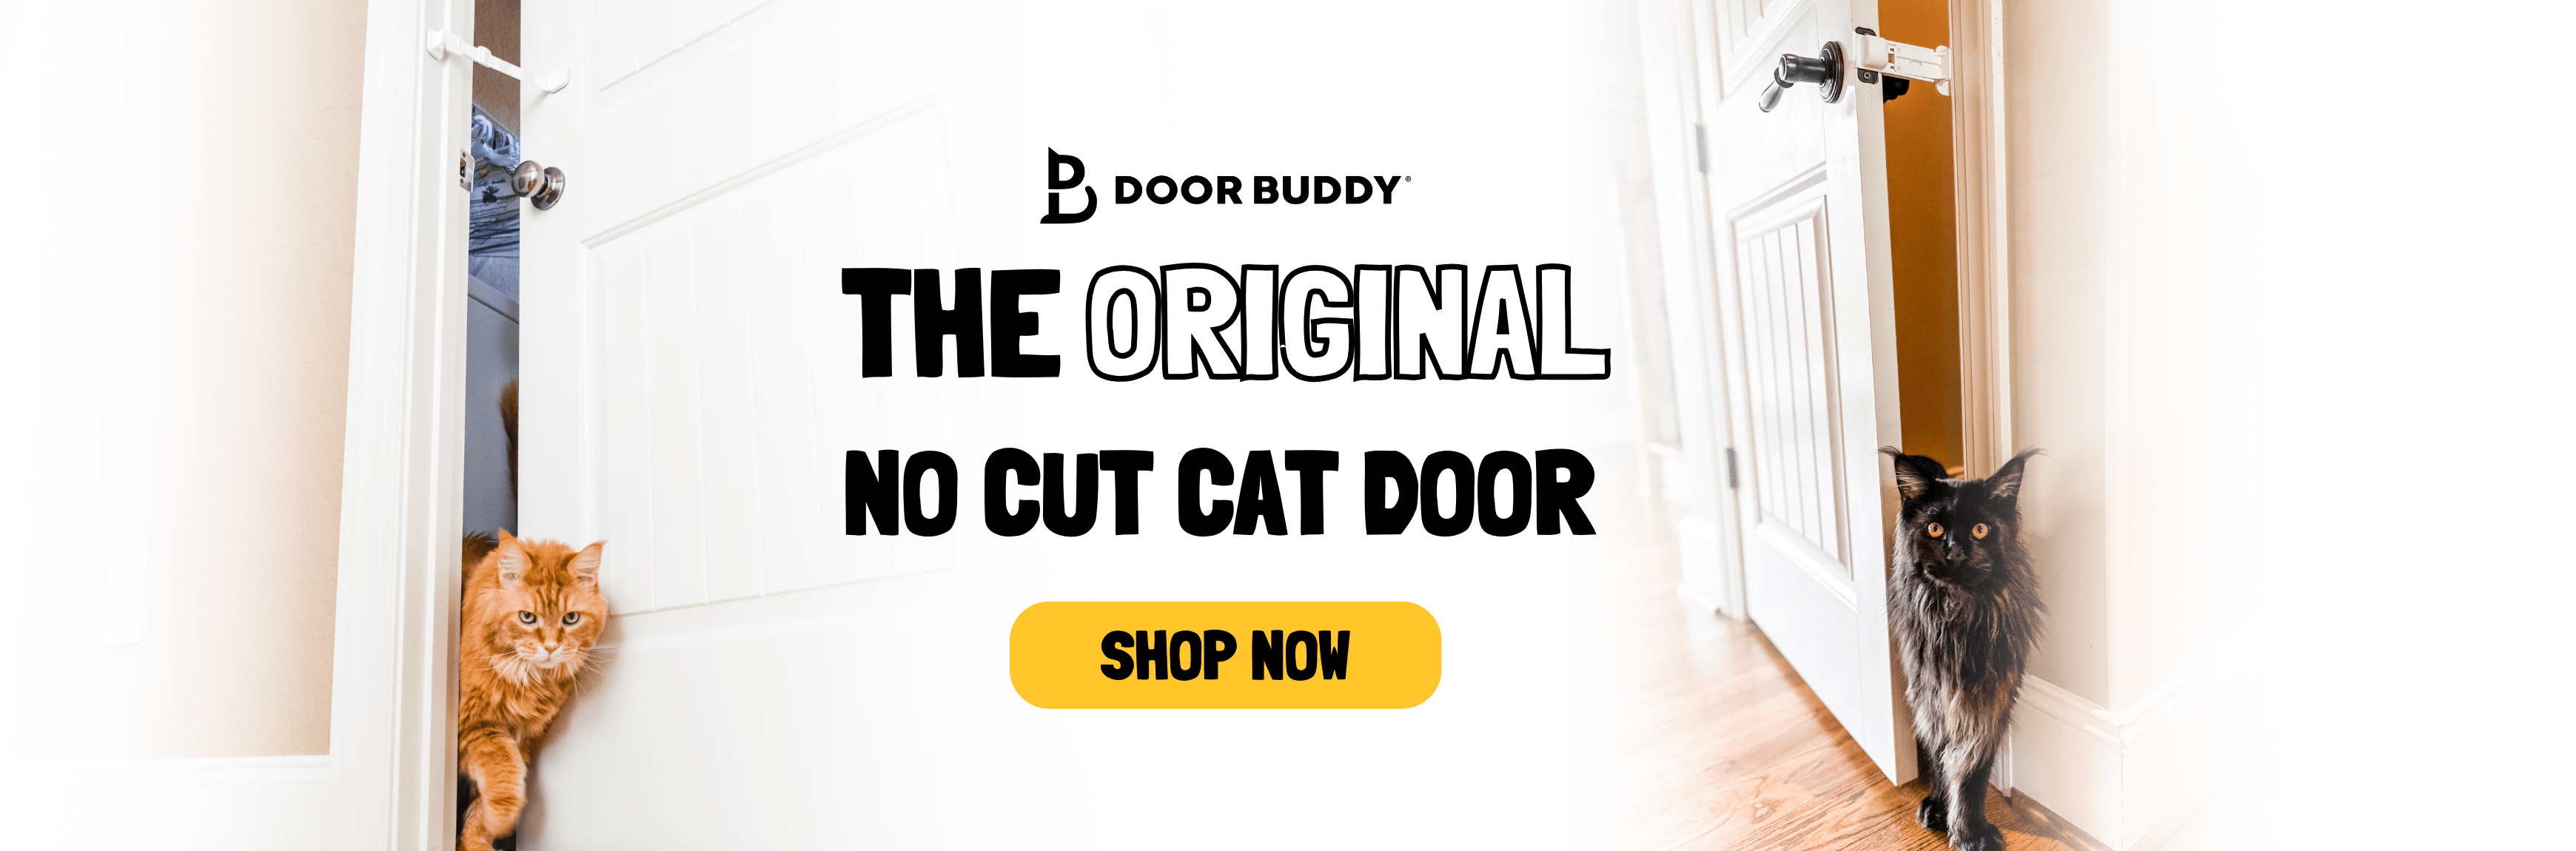 Door Buddy Adjustable Door Strap Keeps Dogs and Babies out of Cat Food and Litter Box